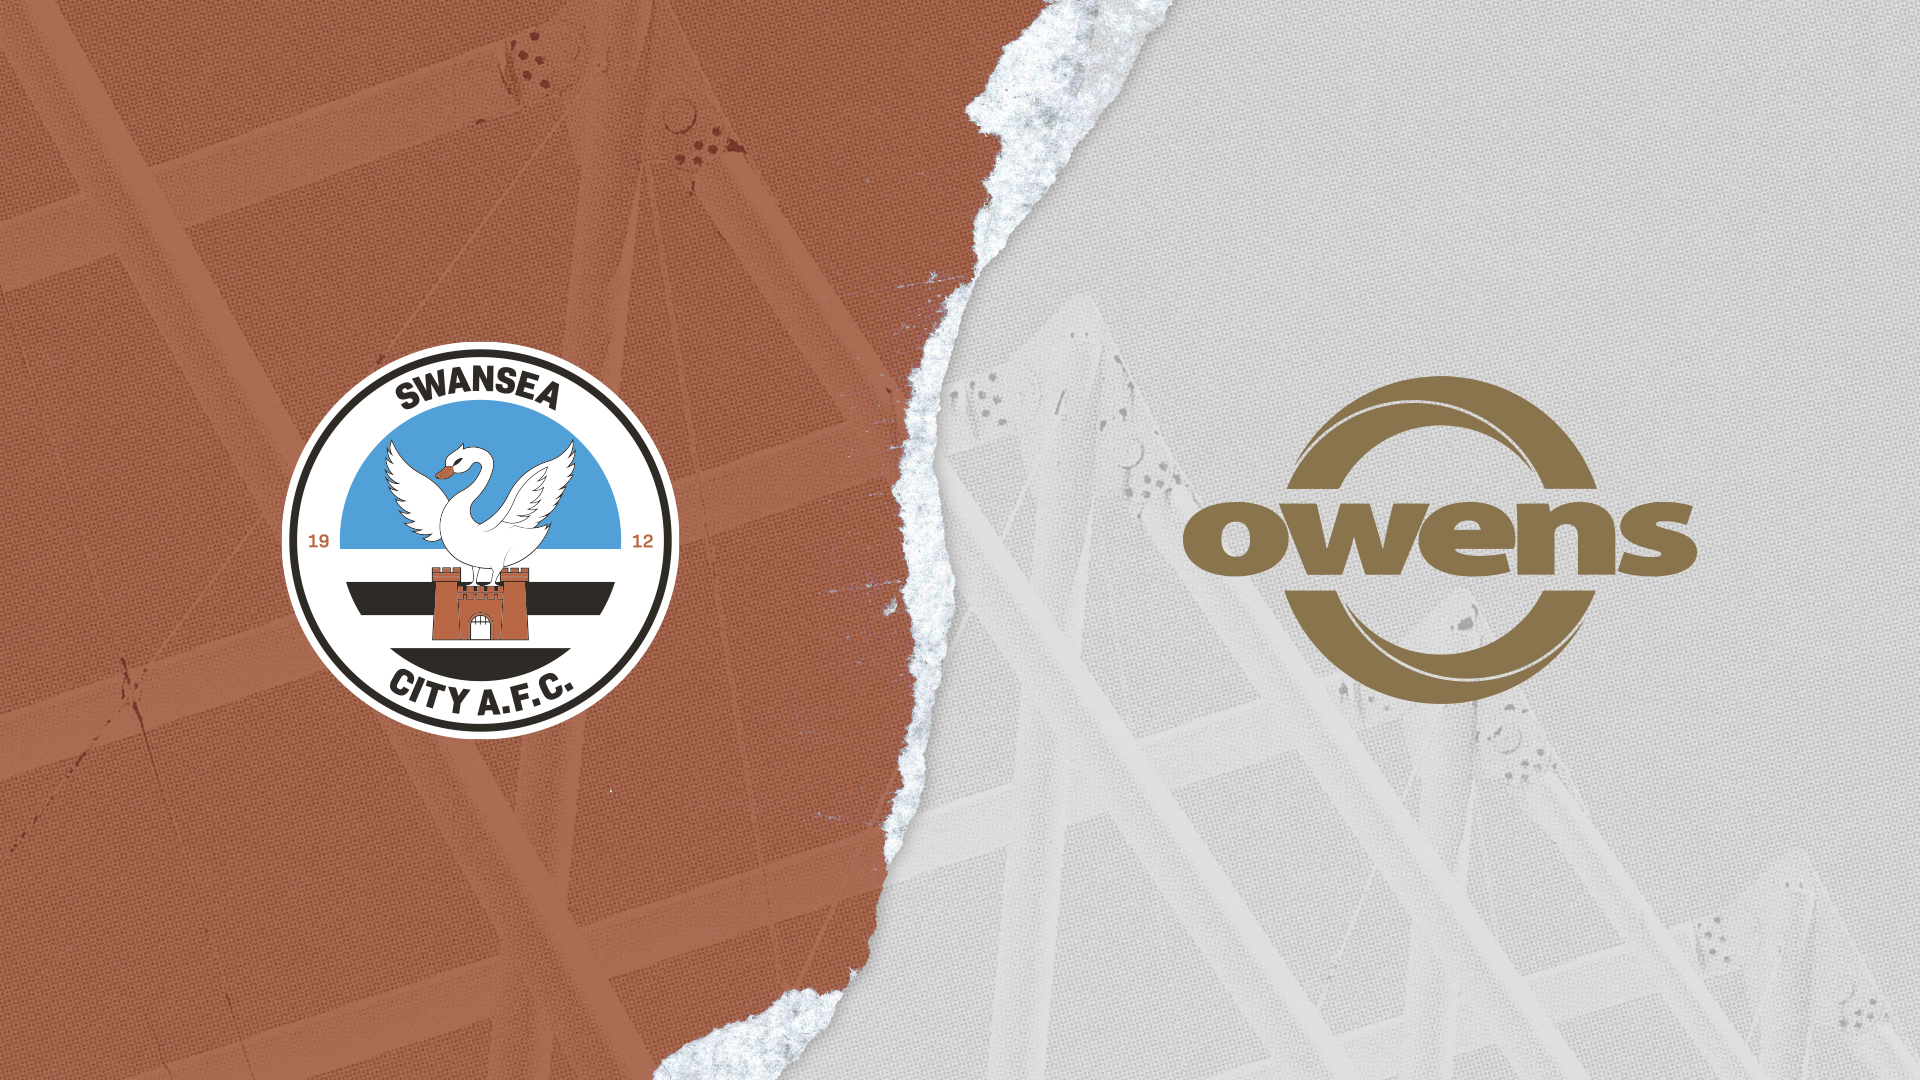 Swansea City and Owens logos next to one another